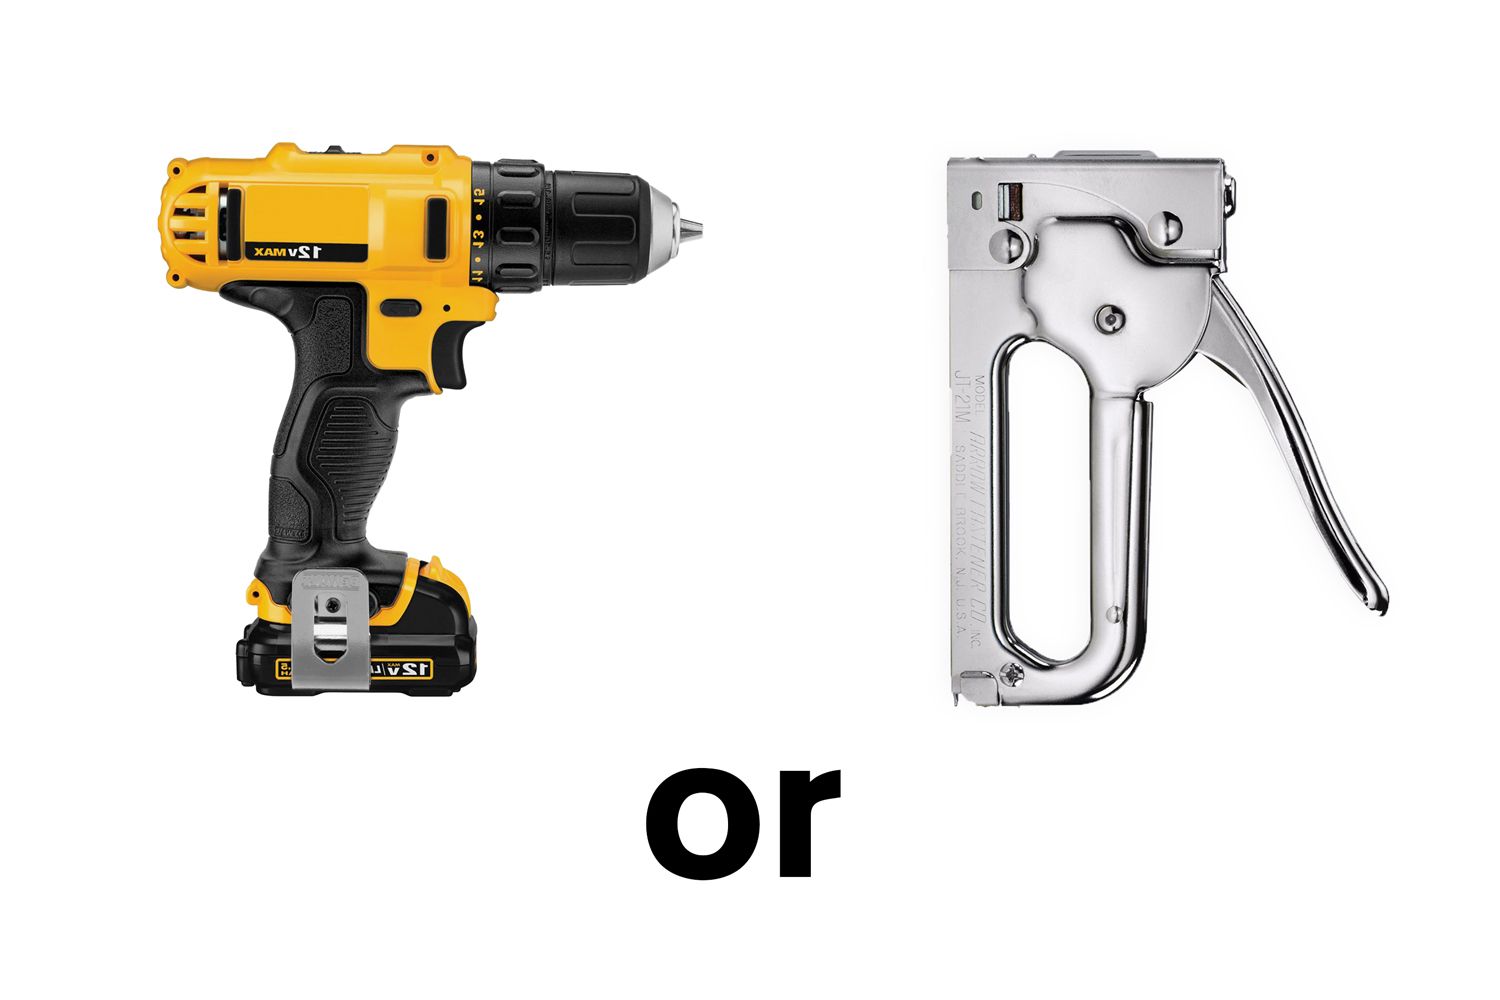 An image showing a power drill and a metal hand stapler